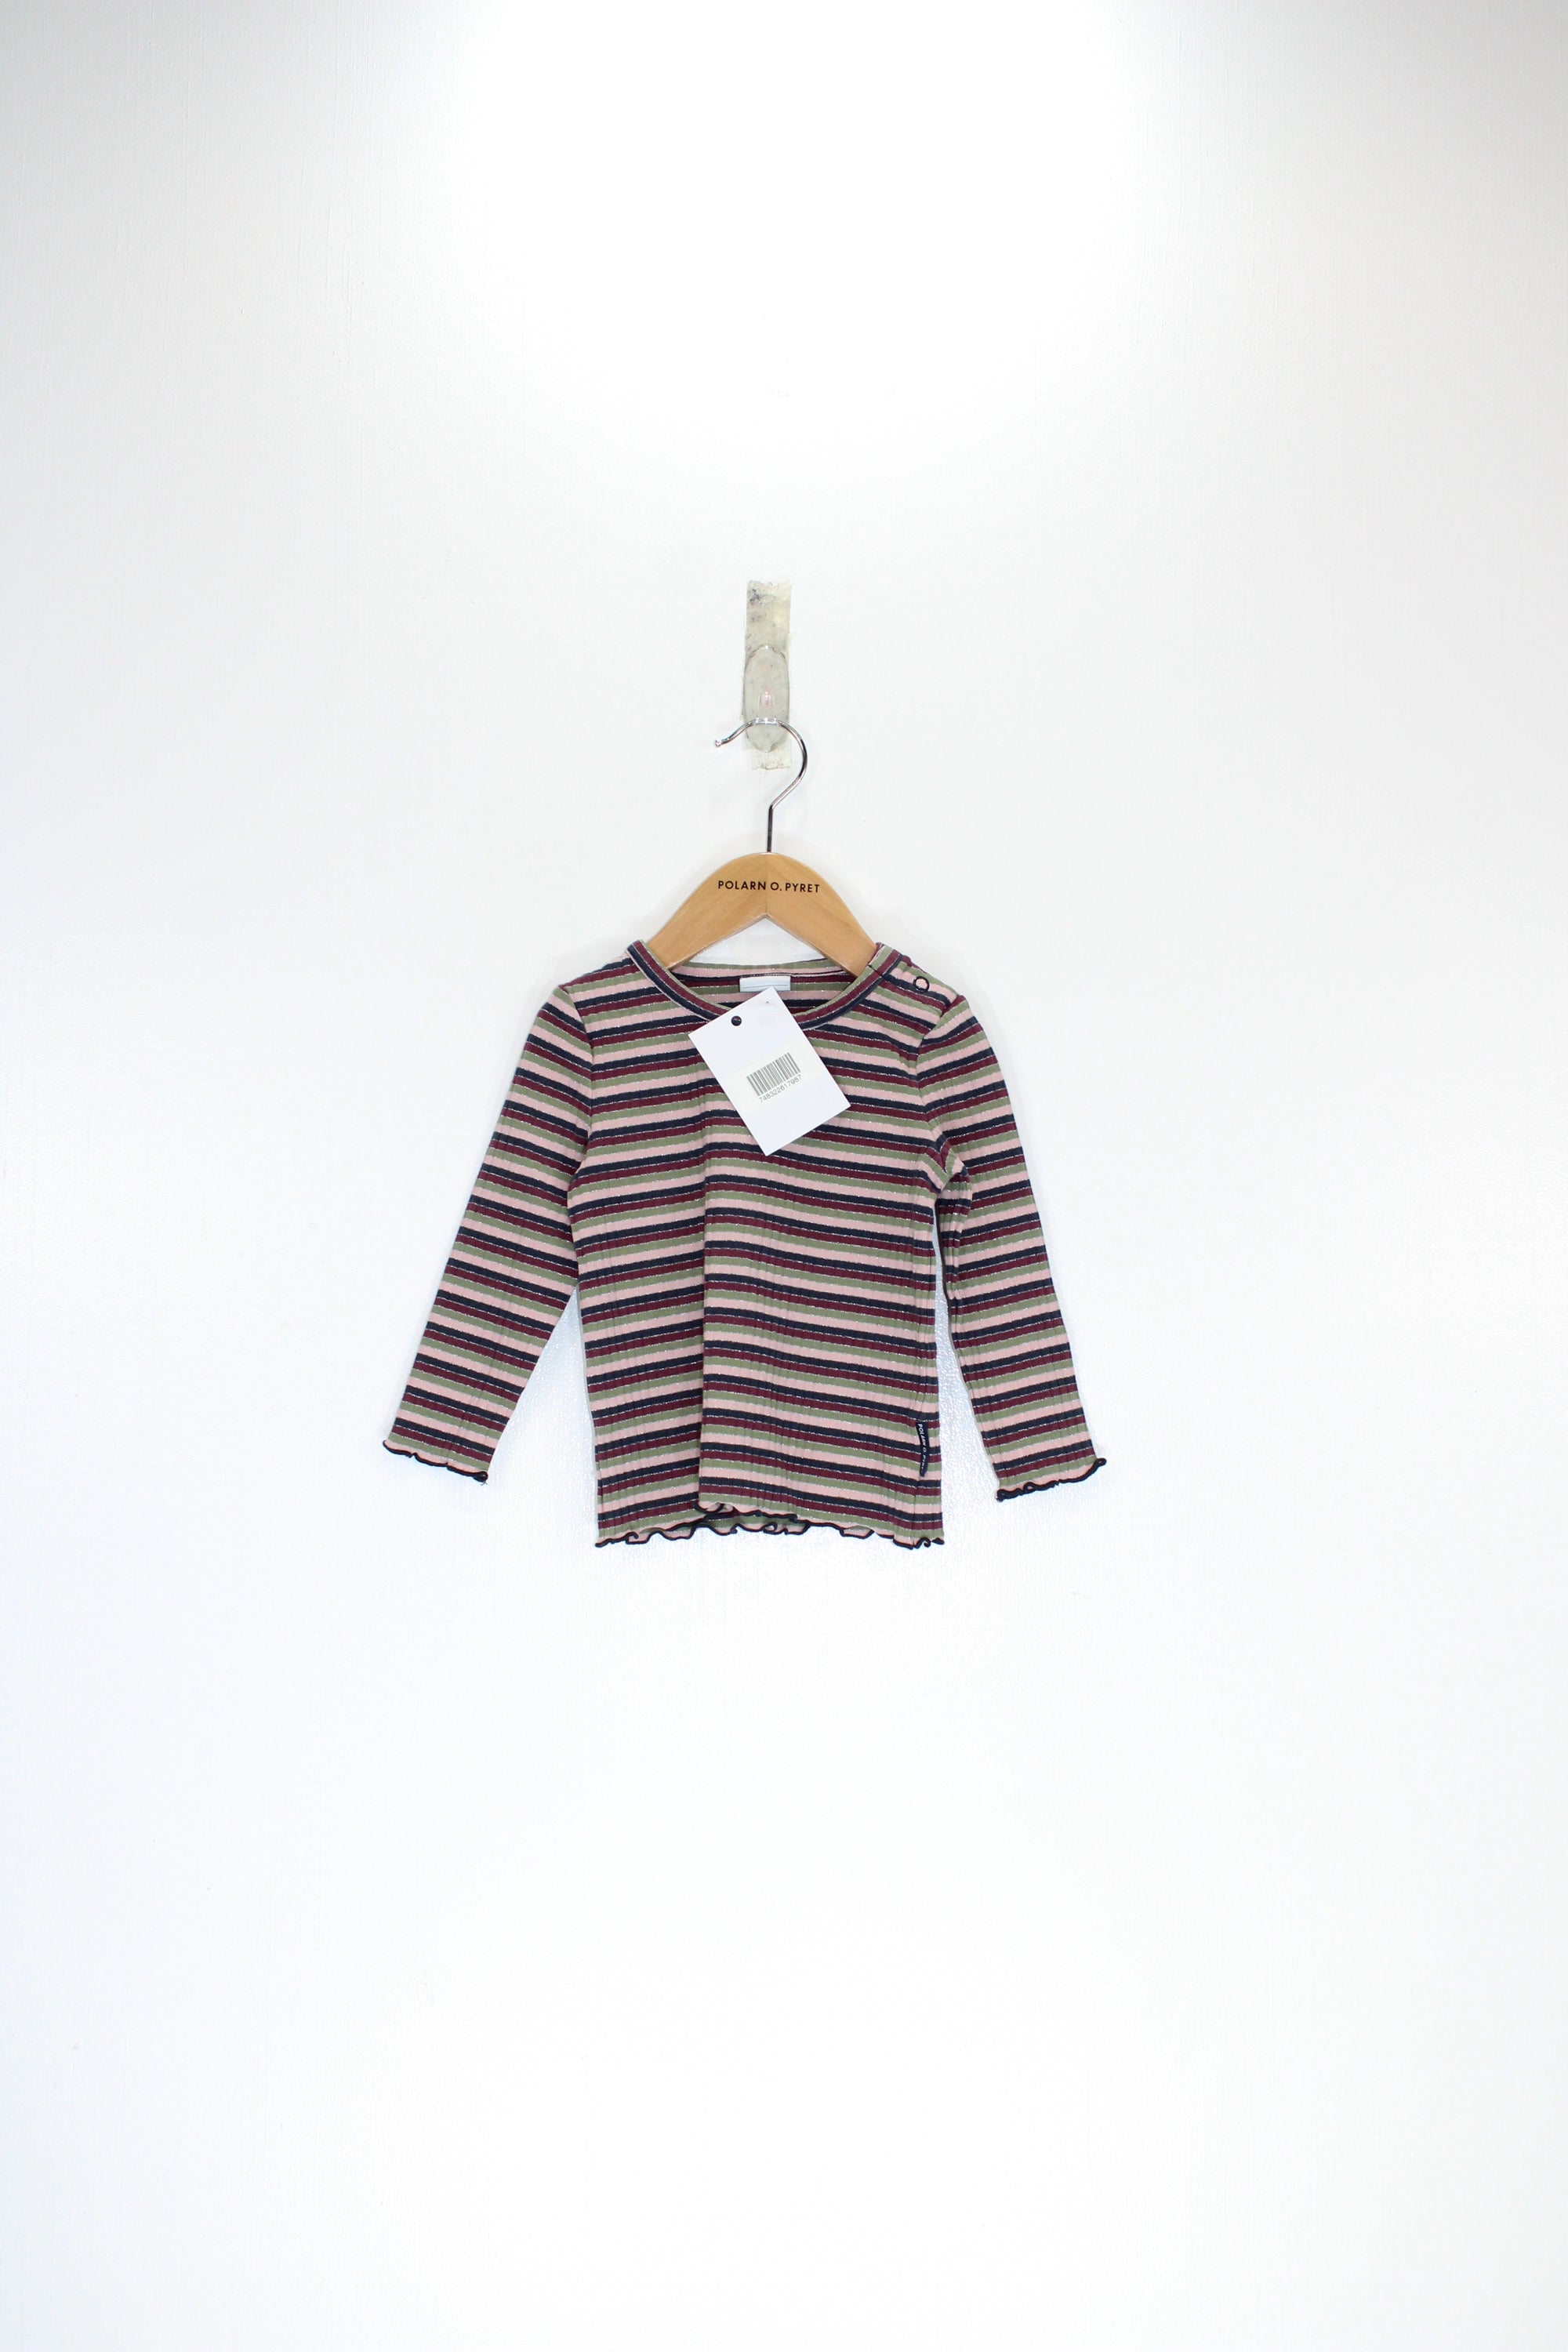 Striped Ribbed Kids Top